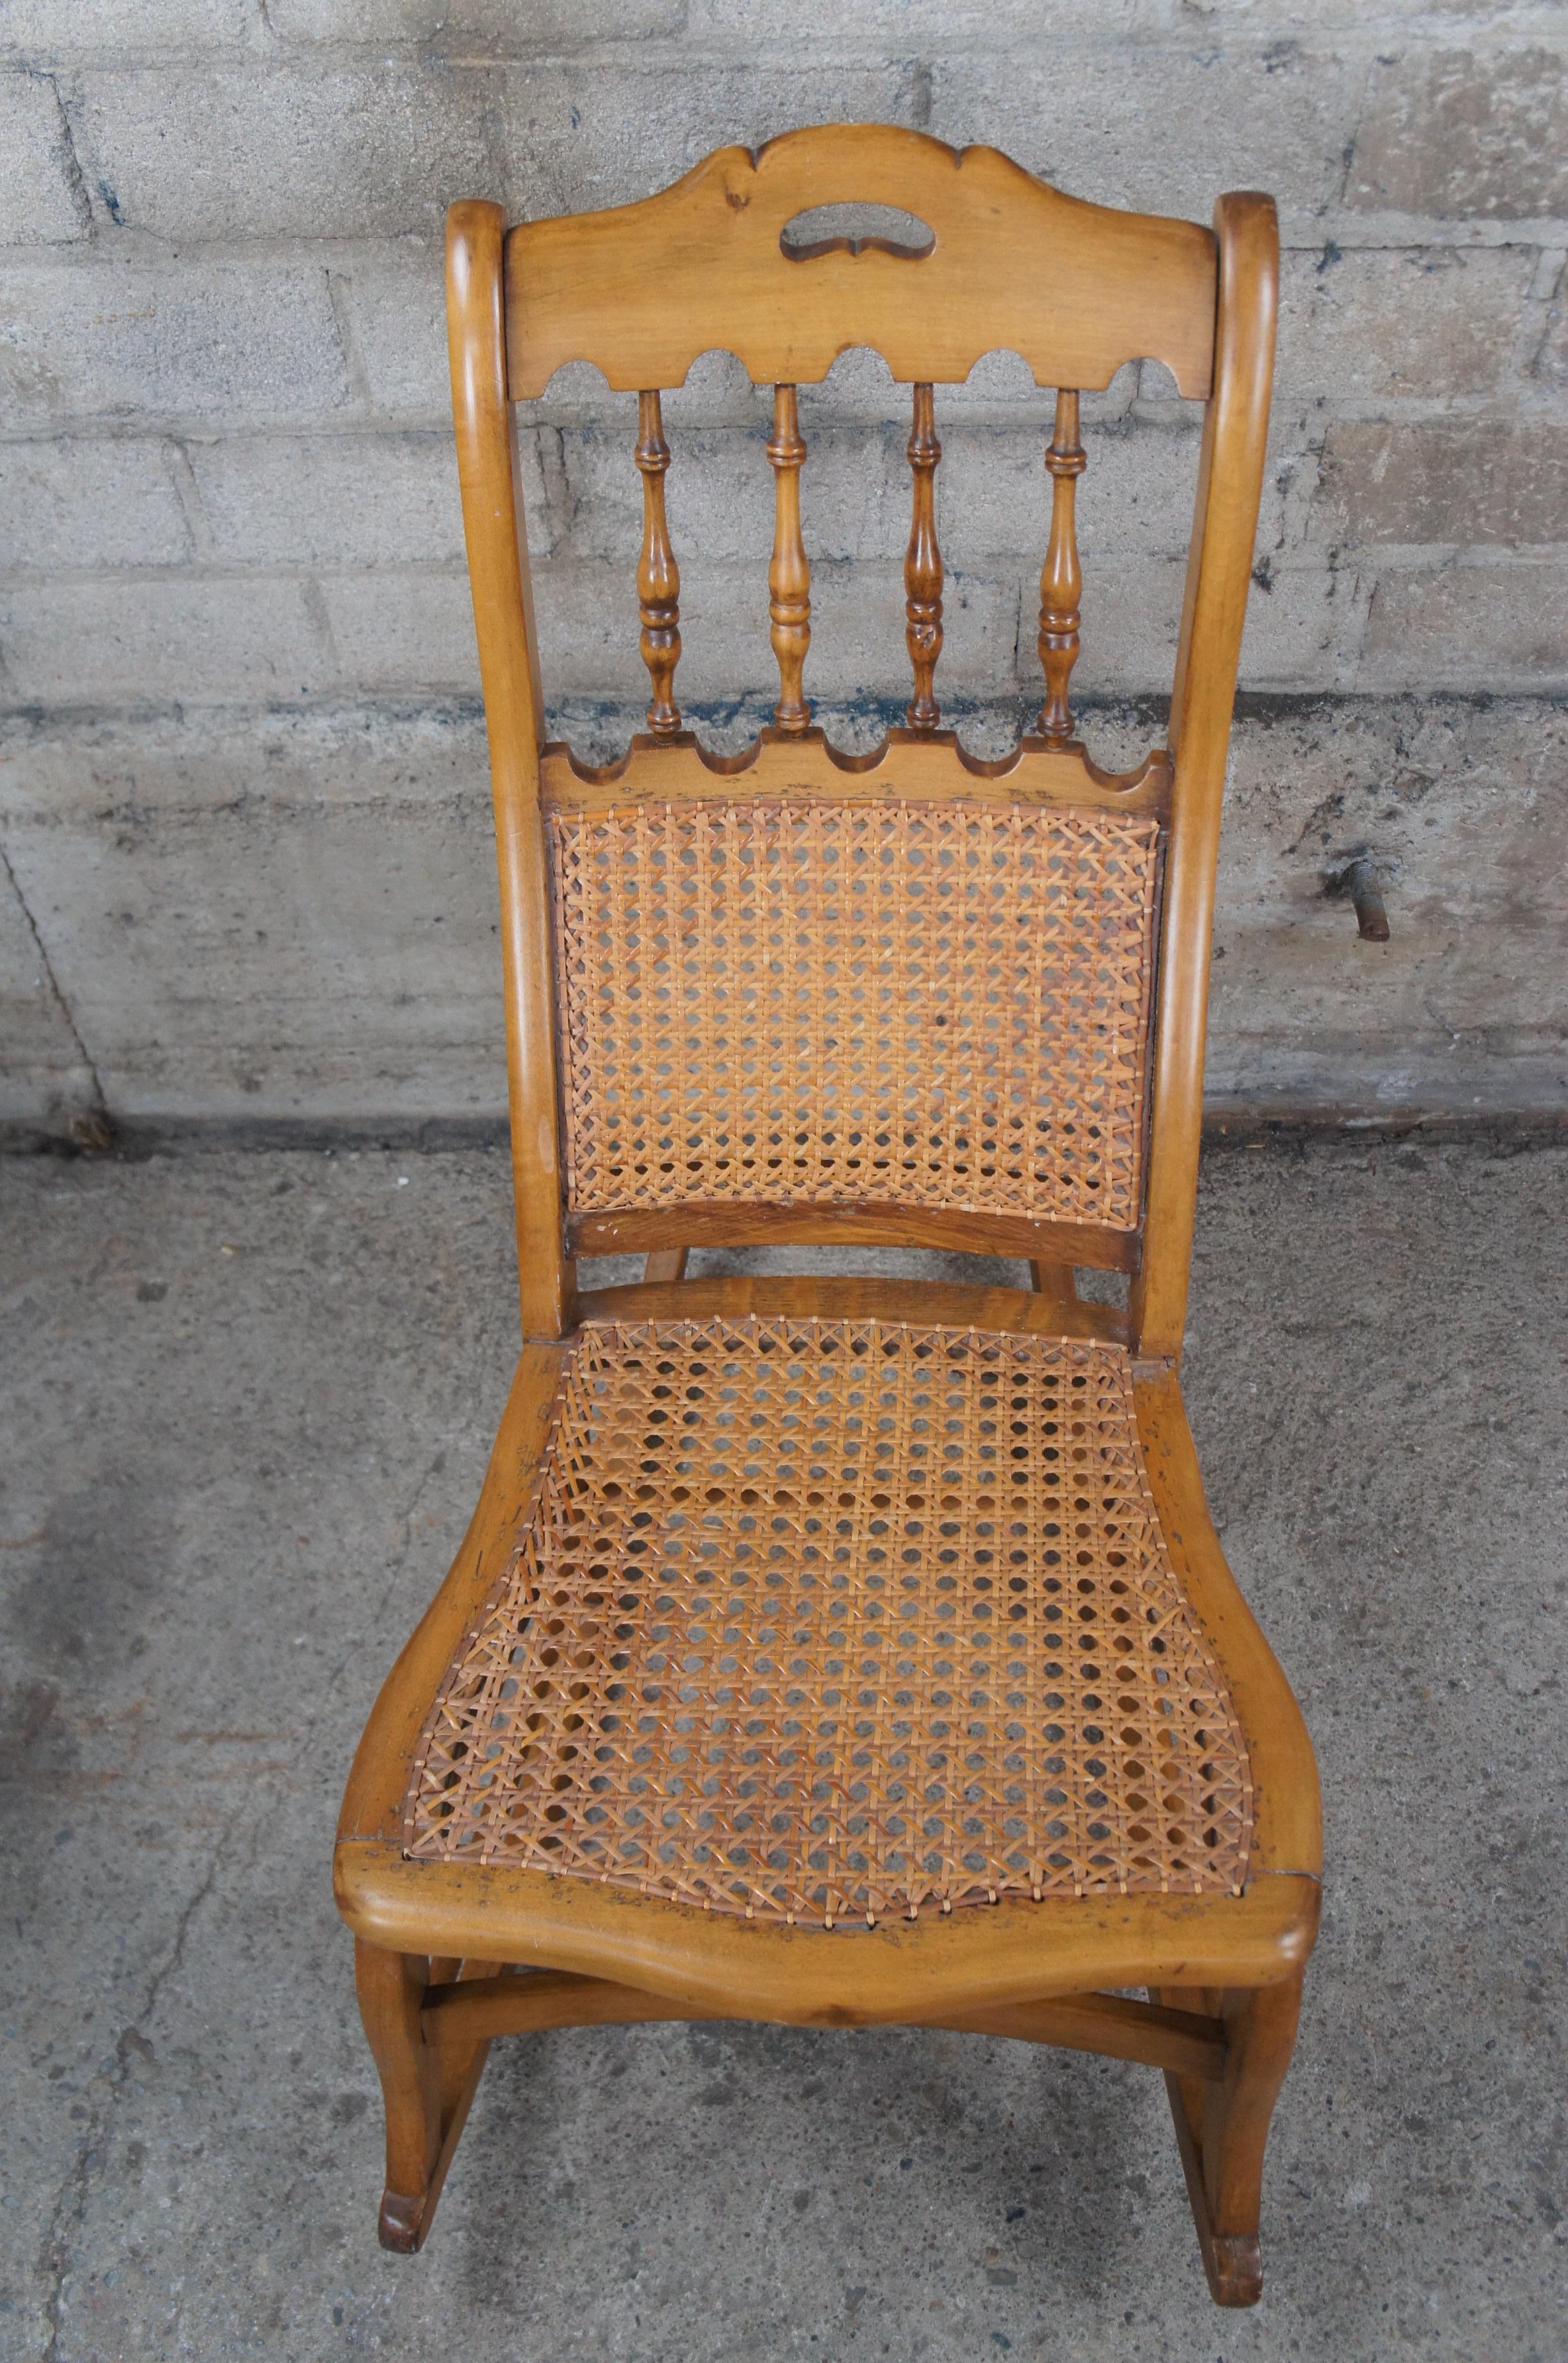 Antique Early American Maple Spindle Back Rocking Chair Cane Seat Petite Rocker For Sale 2